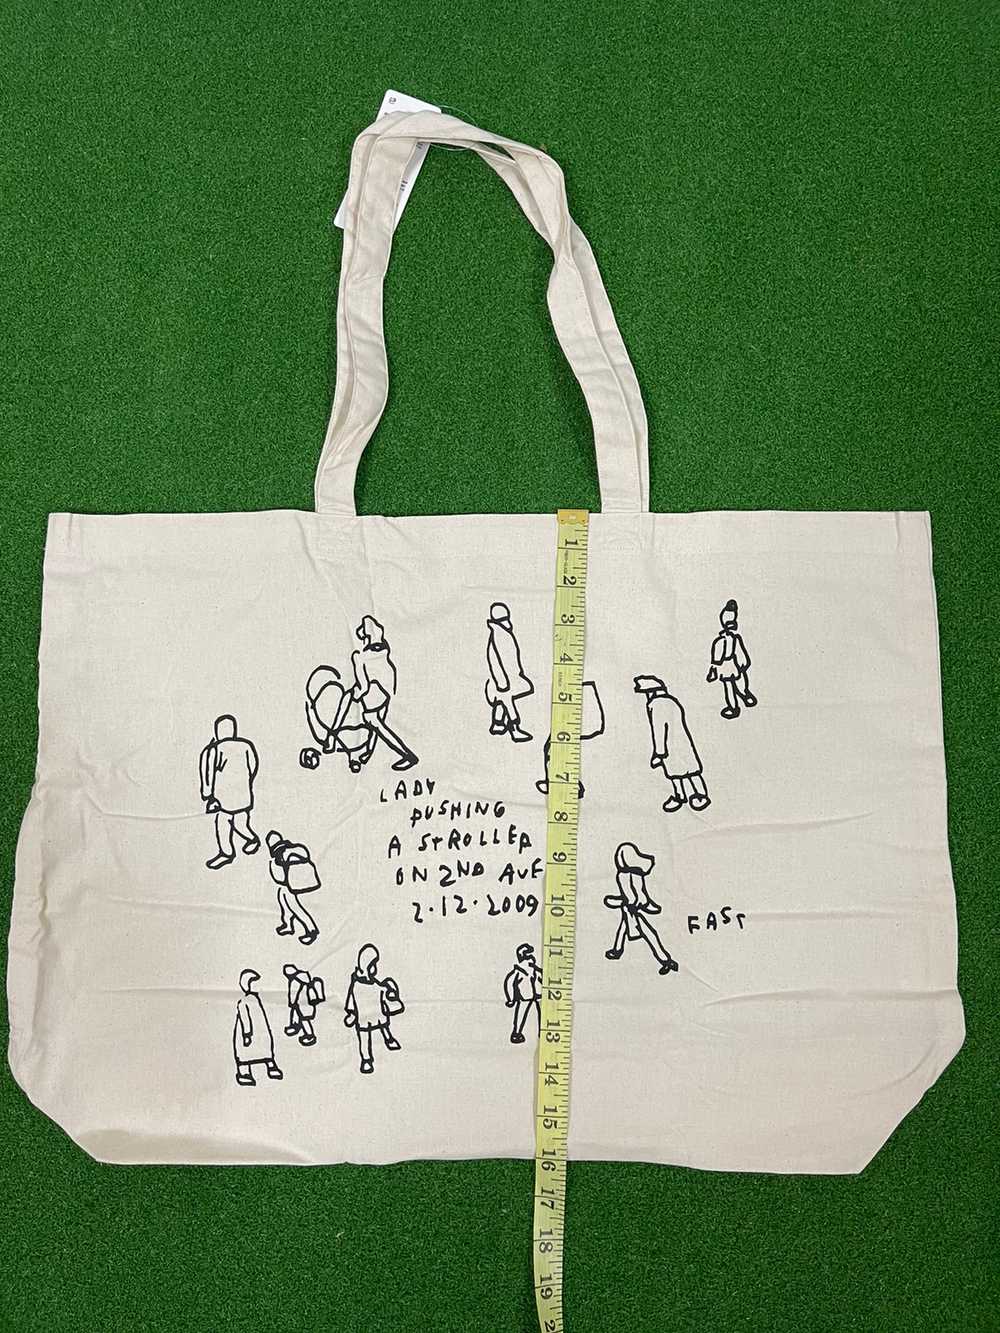 Outdoor Style Go Out! - New Jason Polan Tote Bag … - image 12